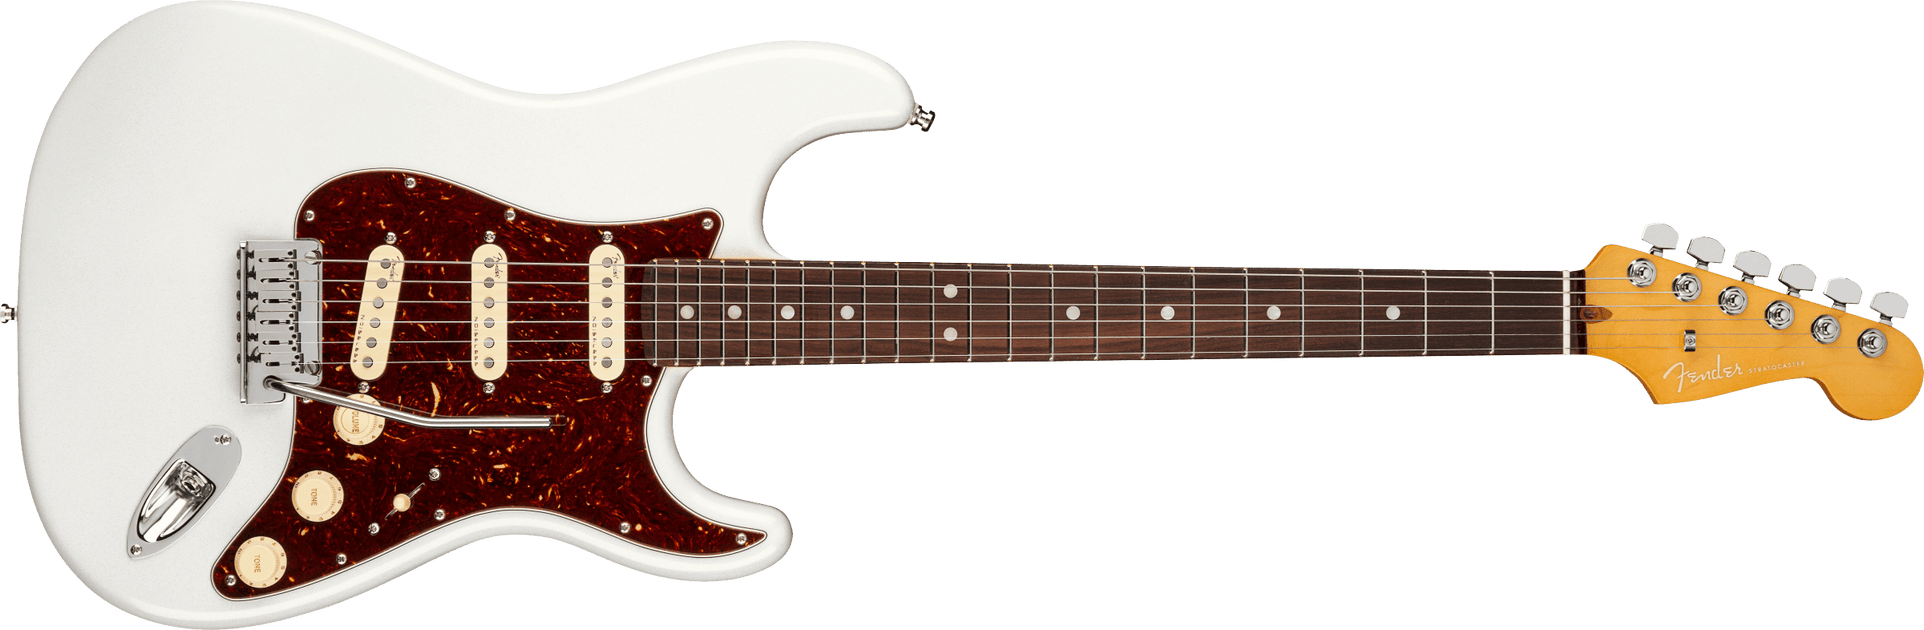 Fender American Ultra Stratocaster Rosewood Fingerboard Arctic Pearl  0118010781